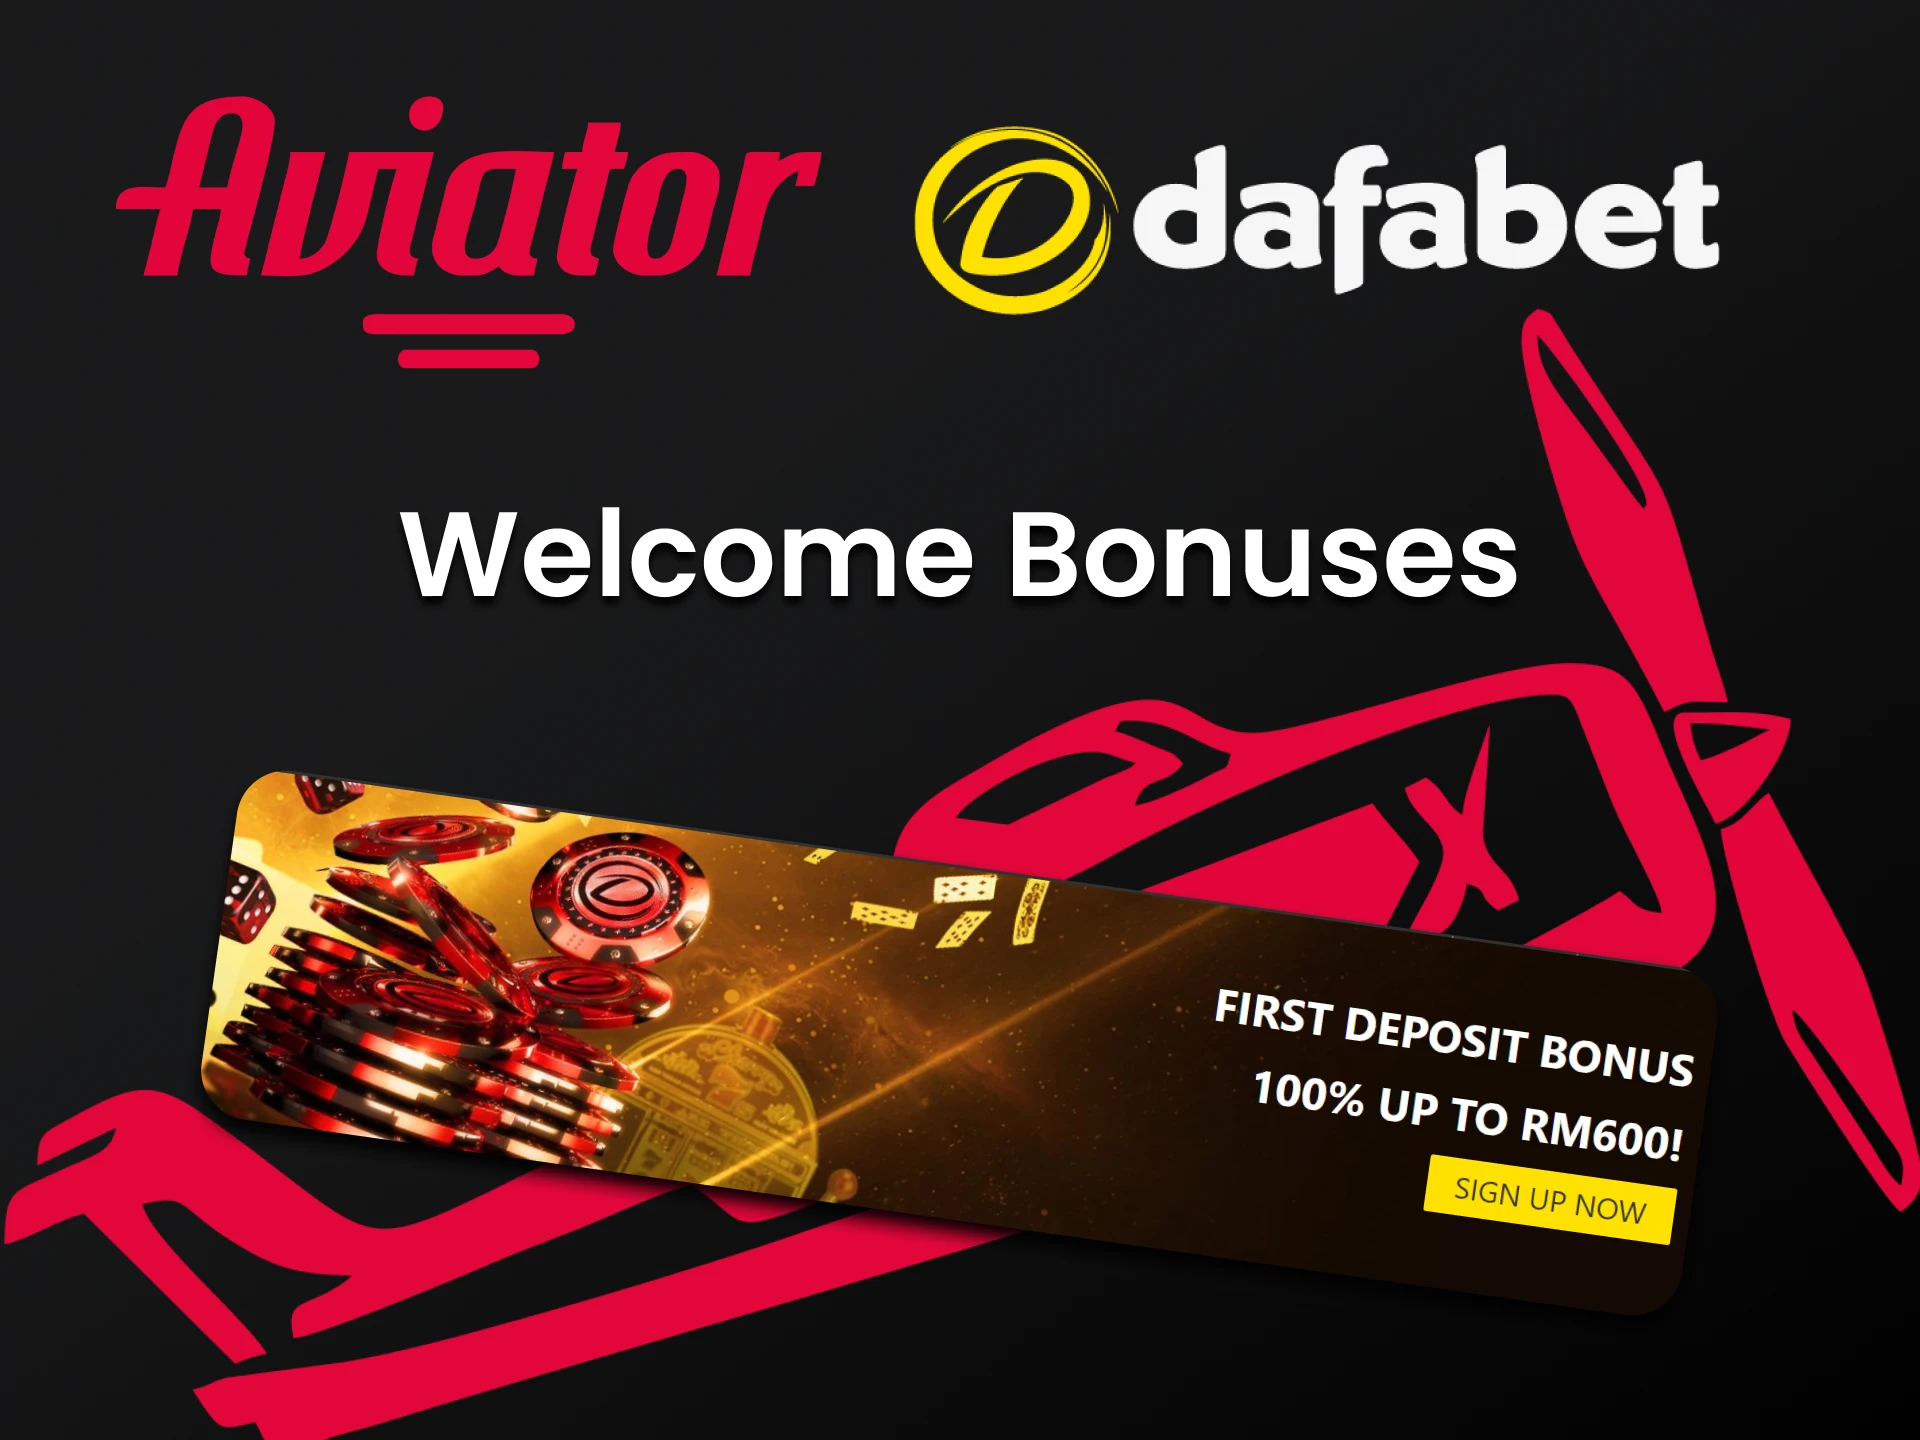 Play Avaitor with Dafabet and get bunus.